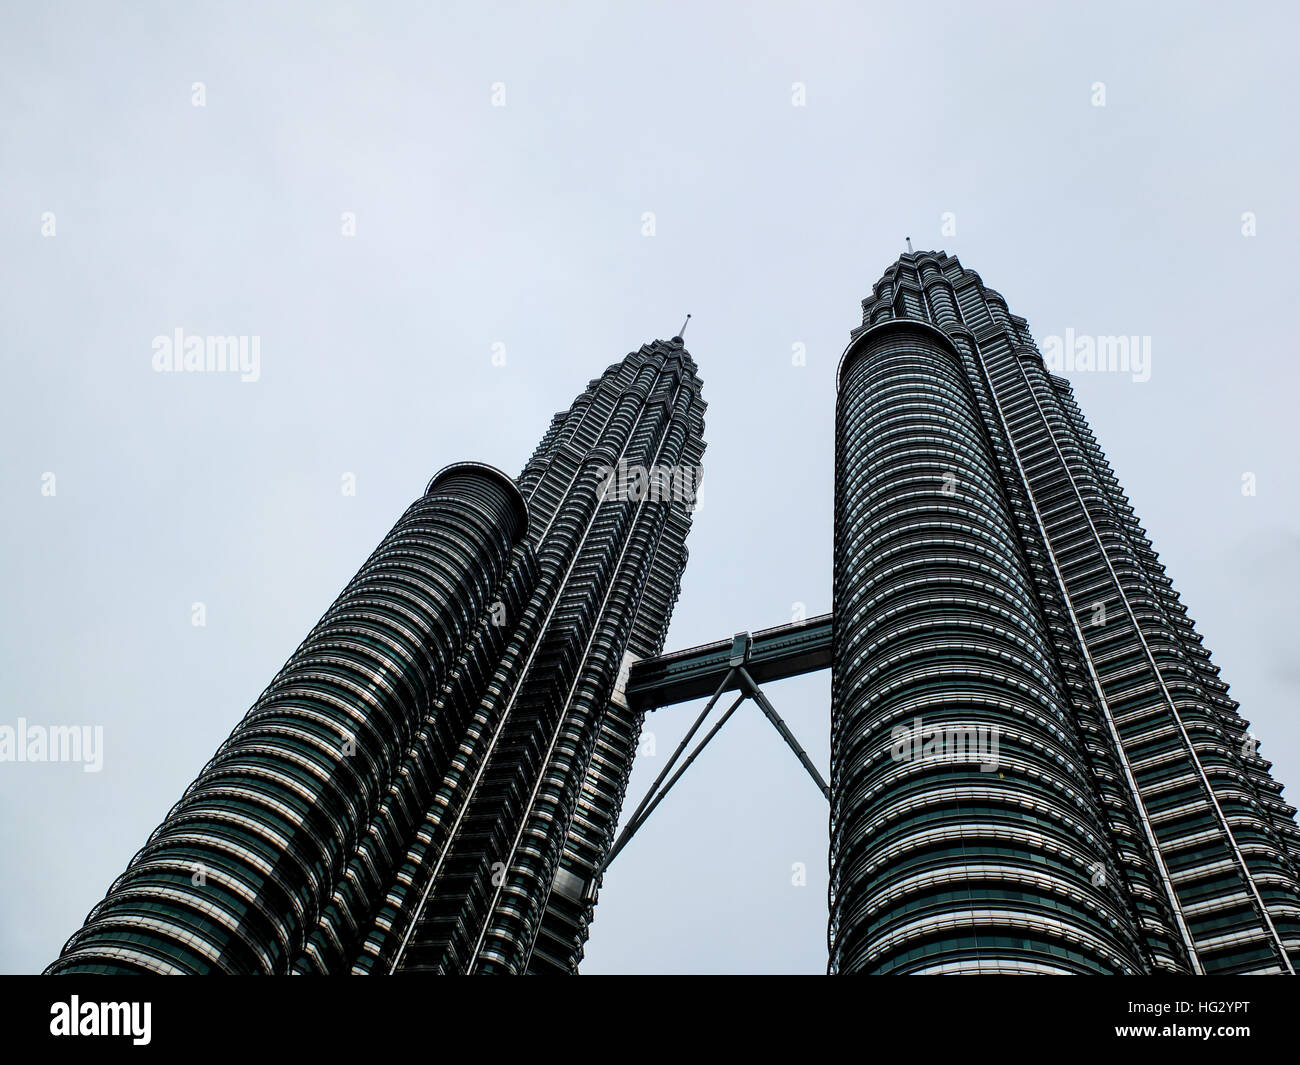 Malaysia famous place - Twin tower Stock Photo